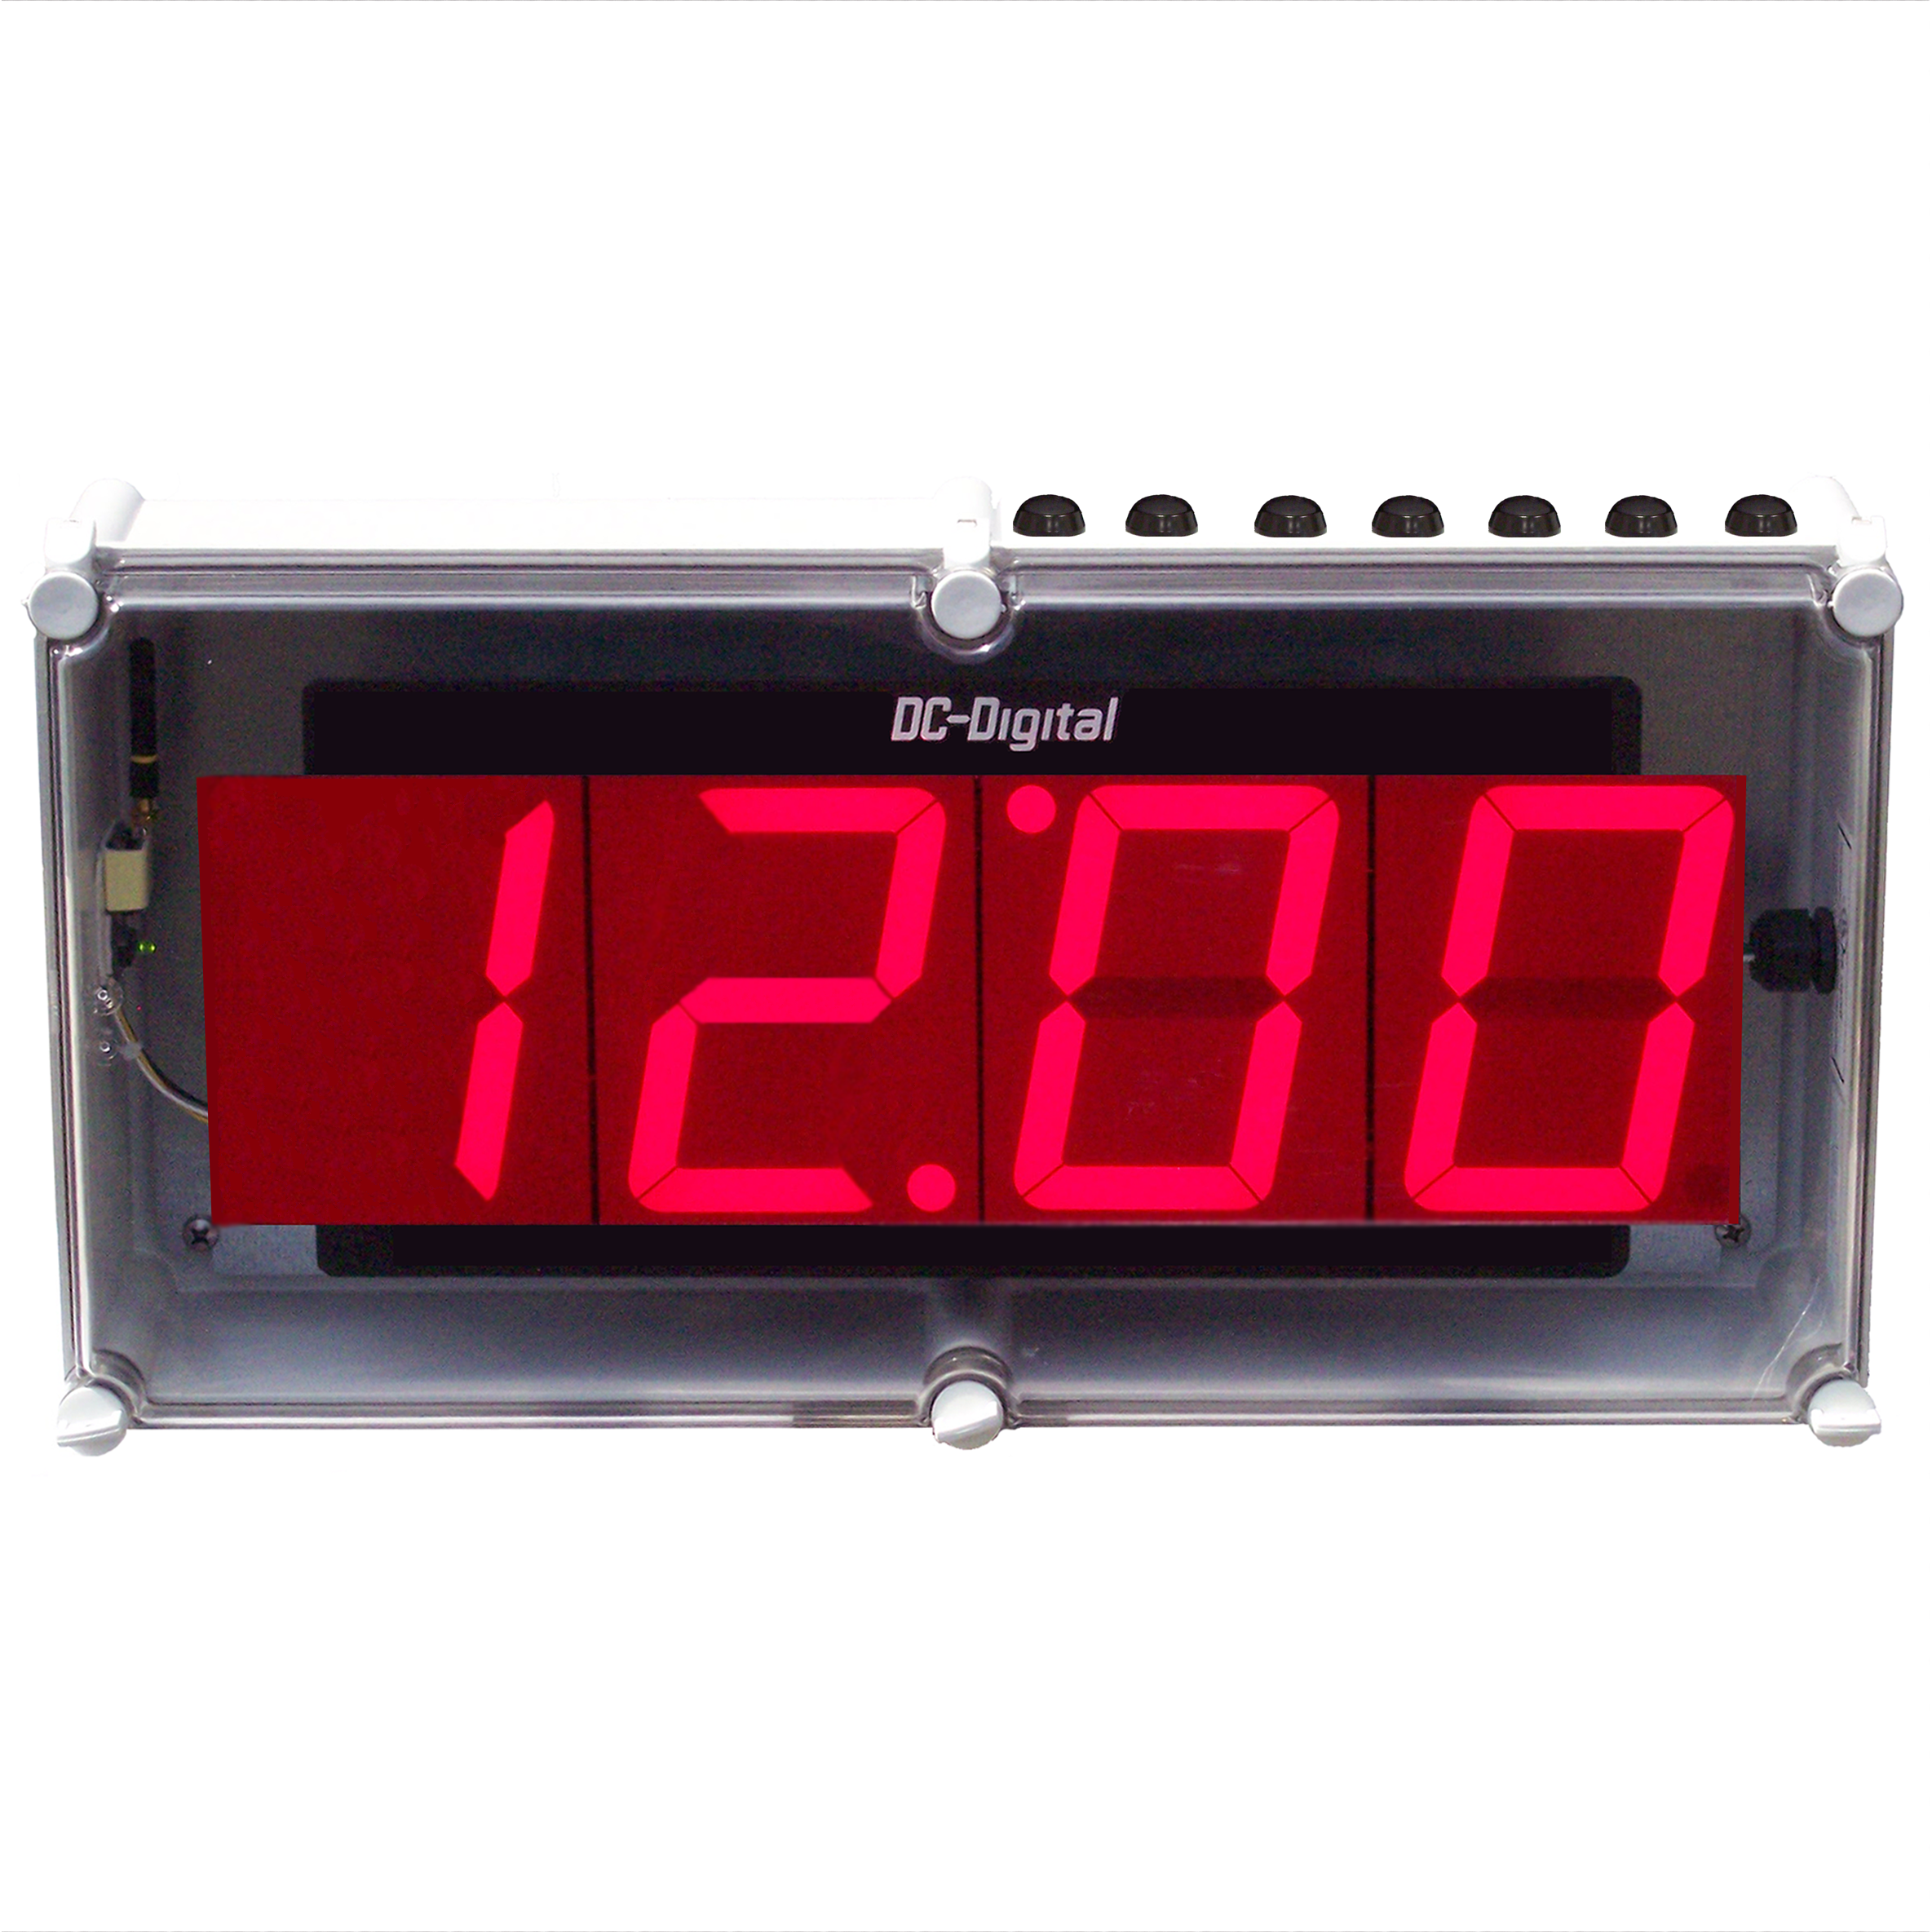 (DC-40UT-NEMA) 4.0 Inch LED Digital, Top Mounted Push-Button Controlled, Count Up timer, Countdown Timer, Time of Day Clock with Nema 4,4X,6,6P,12,12K & IP66 Enclosure